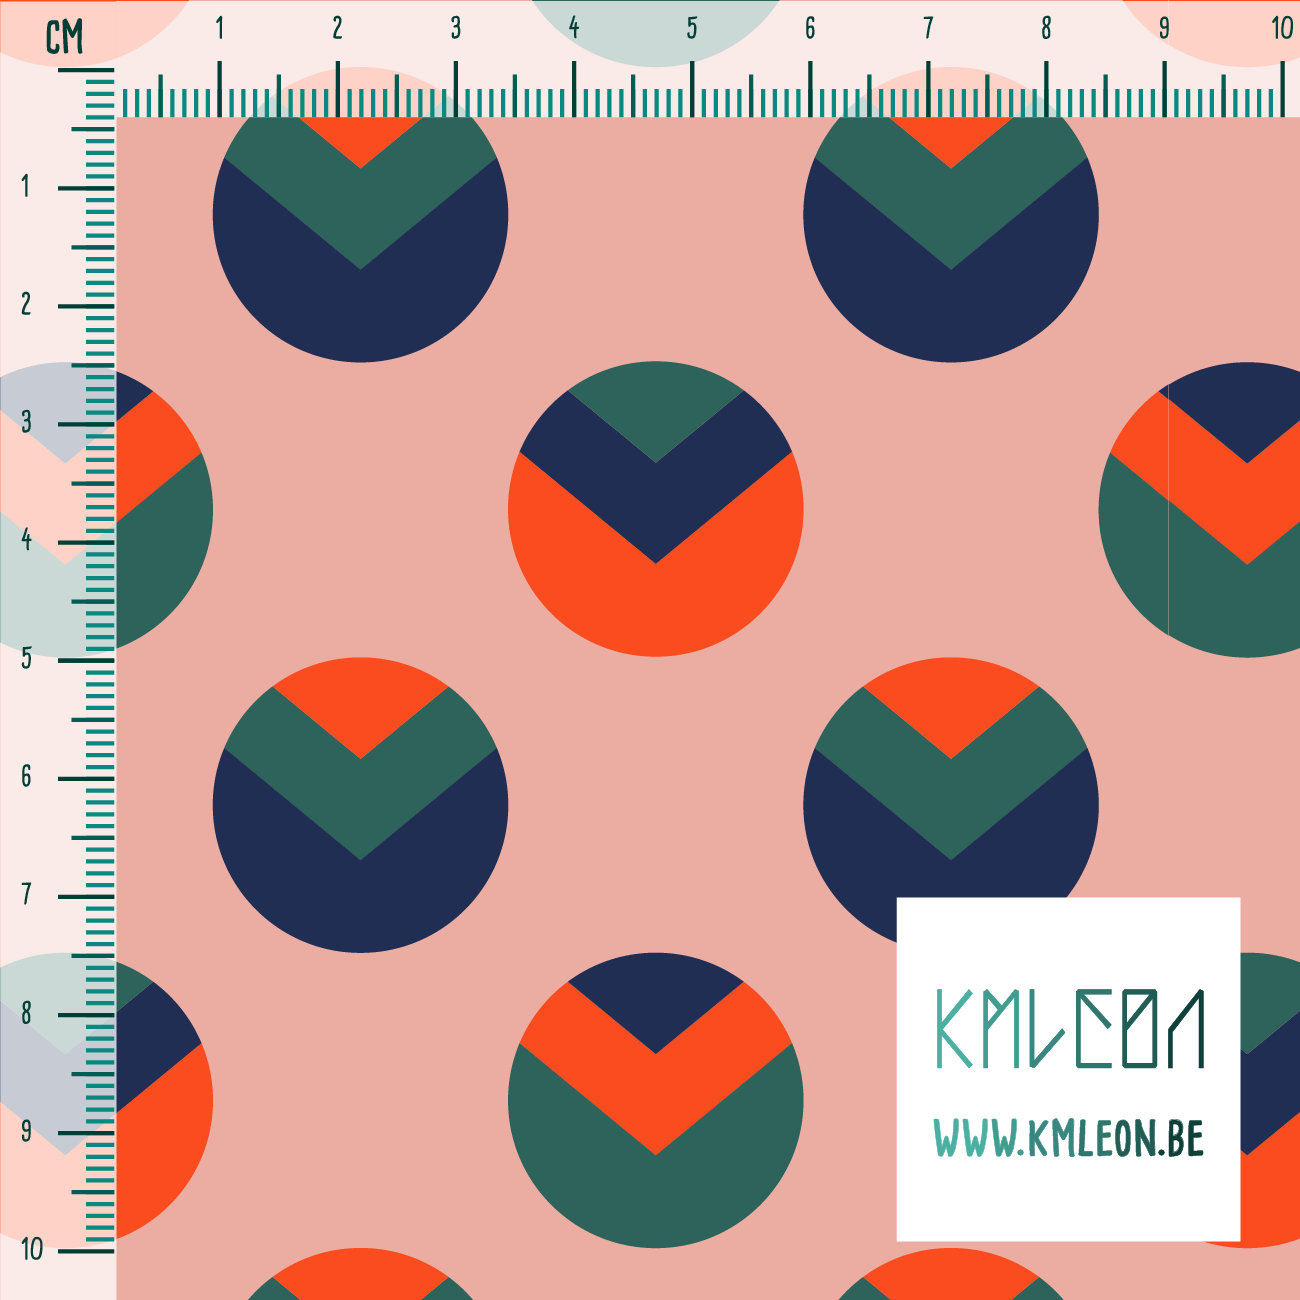 Navy, green and orange circles and triangles fabric